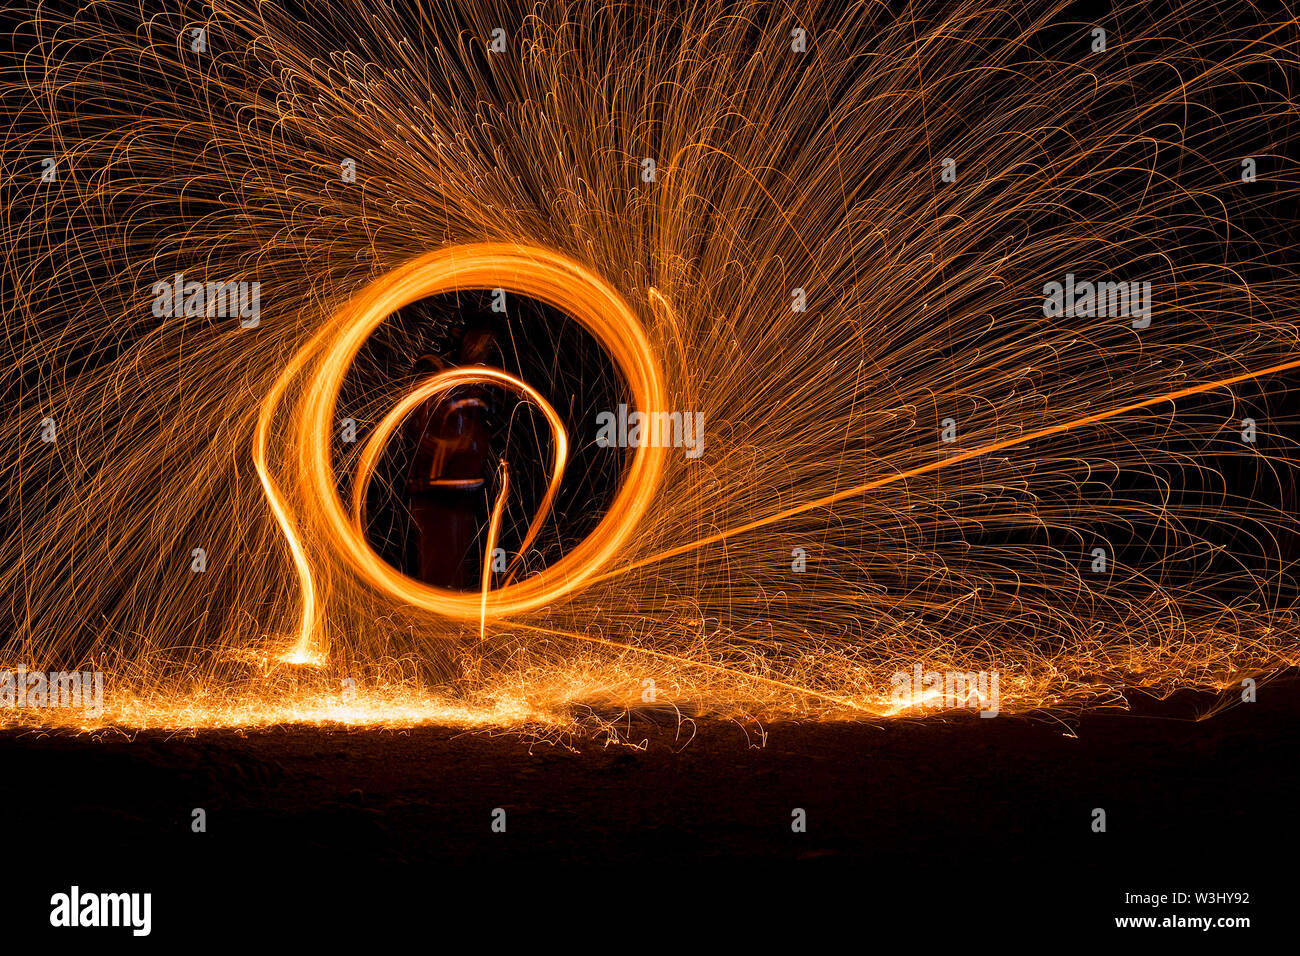 Steel wool photography with umbrella like a protection from burning steel Stock Photo